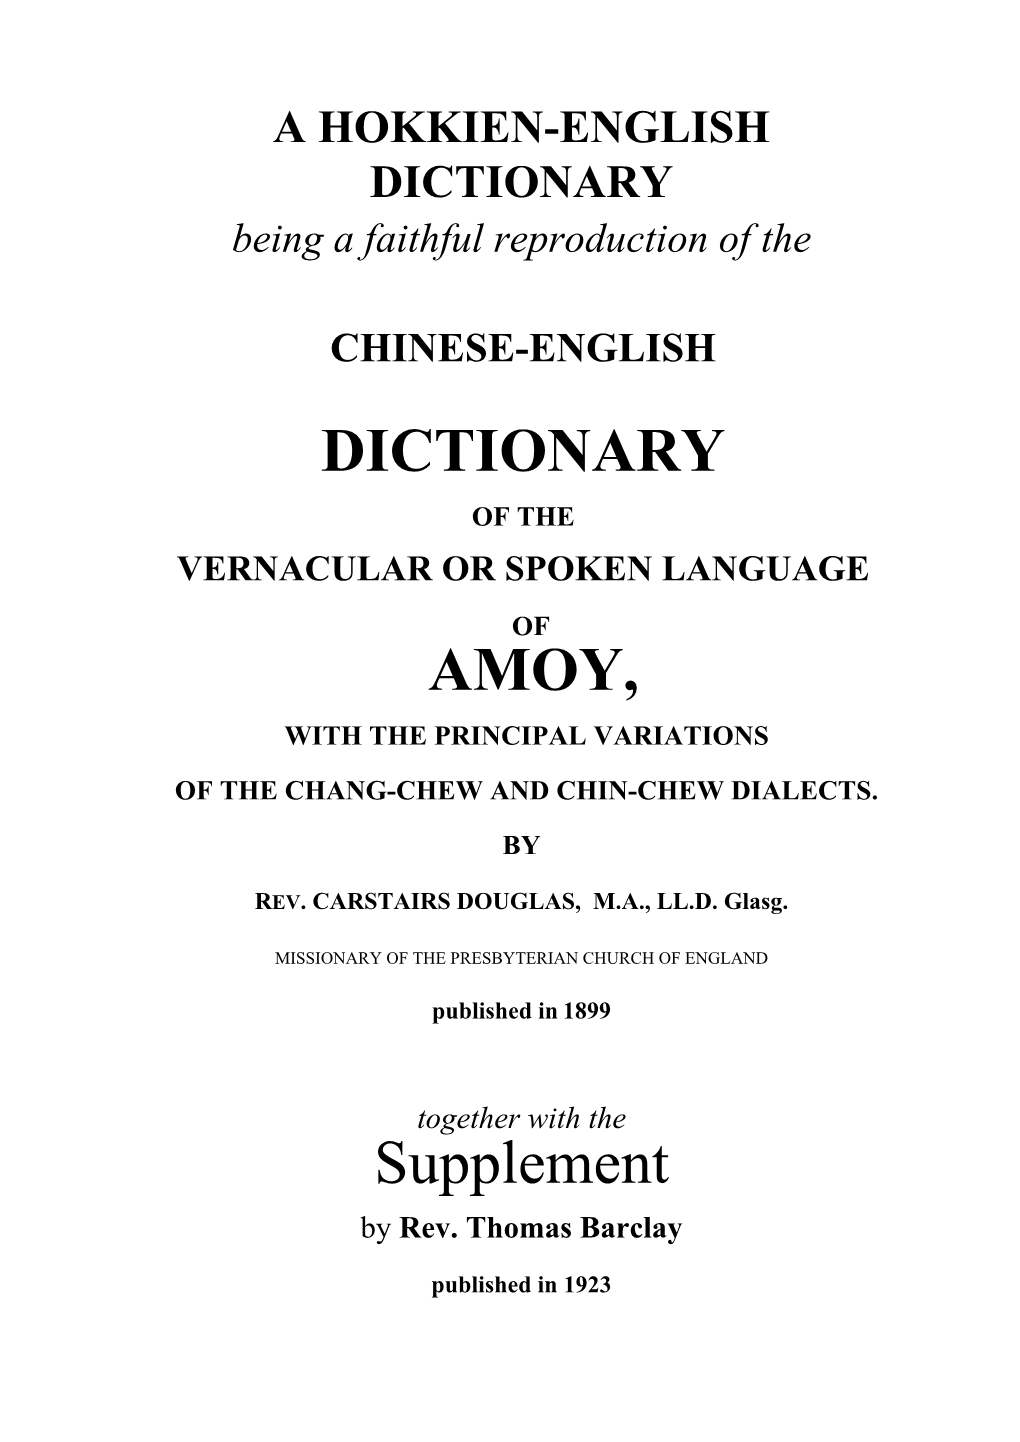 DICTIONARY AMOY, Supplement